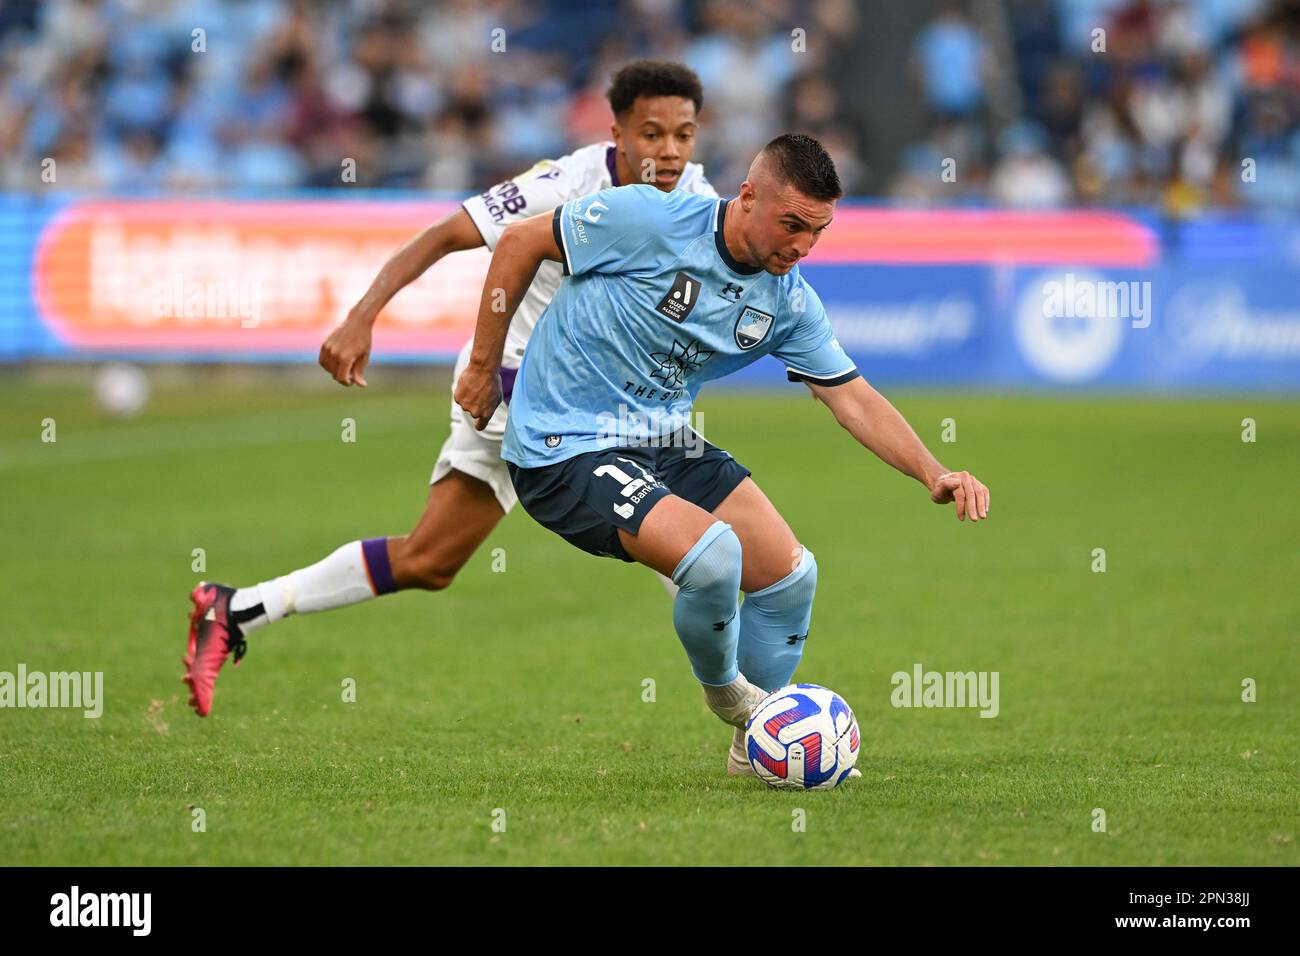 Sydney, Australia. 16th Apr, 2023. Robert Mak (R) of Sydney Football Club team and Antonee Alan Burke-Gilroy (L) of Perth Glory team in action during the 2022-23 Liberty A-League Men's soccer semi-final match between Sydney FC and Western United held at the Allianz Stadium. final score; Sydney football club 3:1 Perth glory Credit: SOPA Images Limited/Alamy Live News Stock Photo